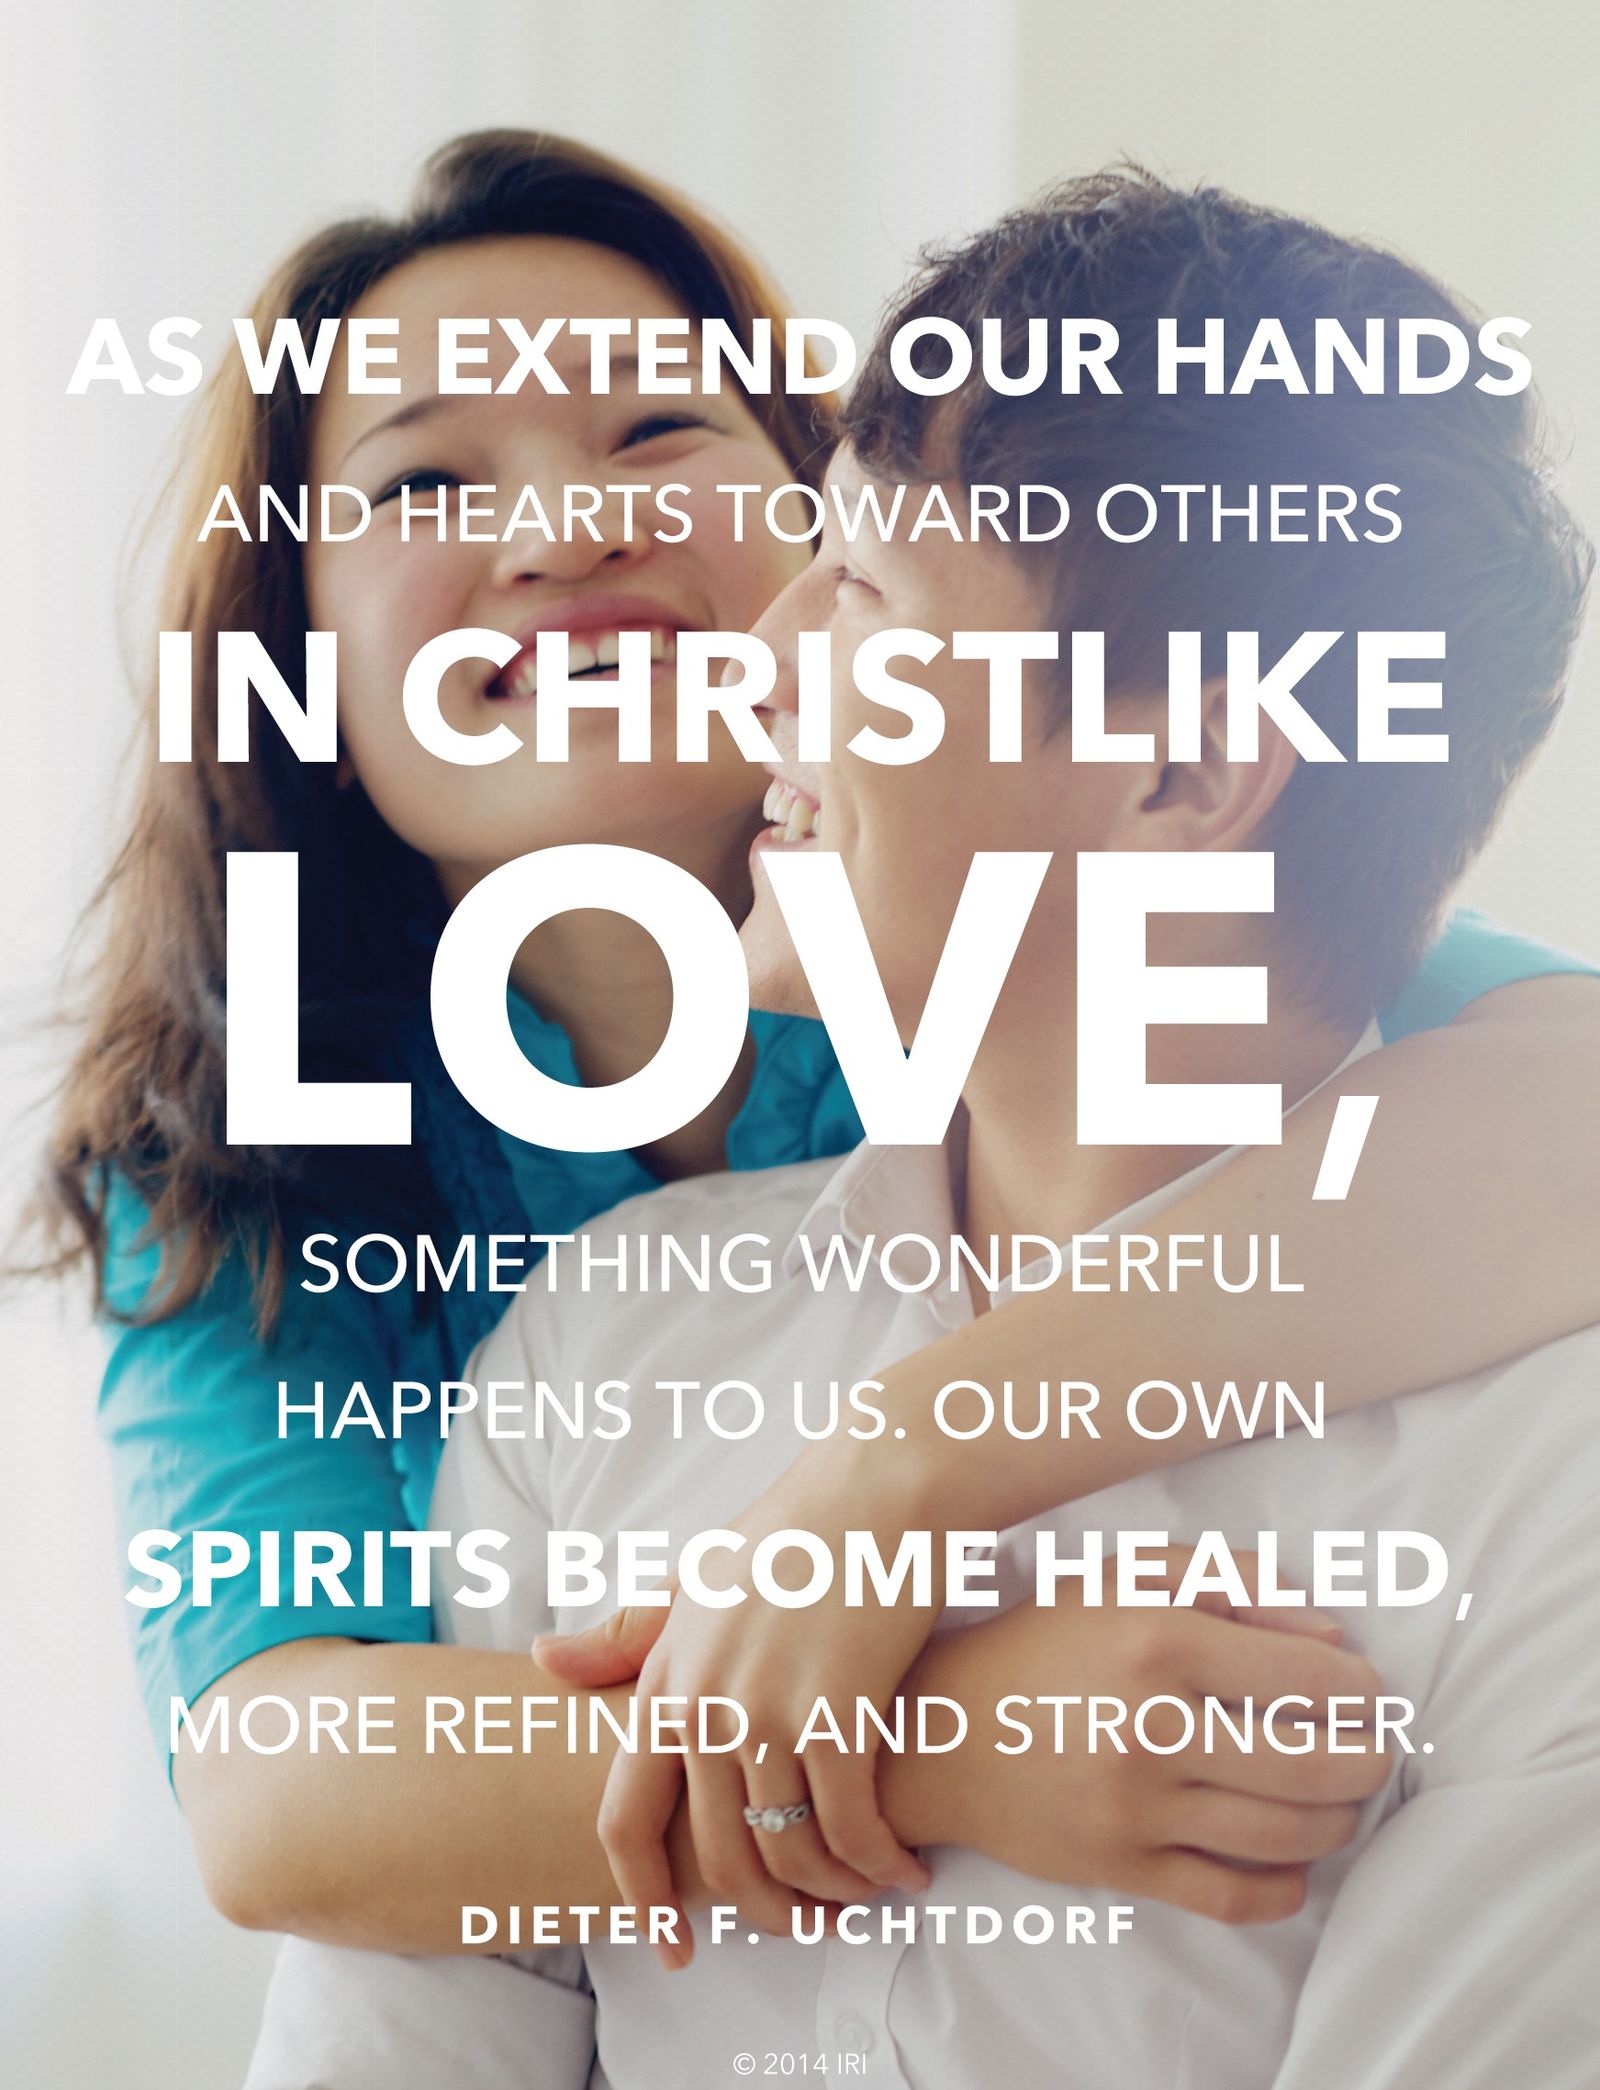 “As we extend our hands and hearts toward others in Christlike love, something wonderful happens to us. Our own spirits become healed, more refined, and stronger.”— President Dieter F. Uchtdorf, “You Are My Hands” © undefined ipCode 1.